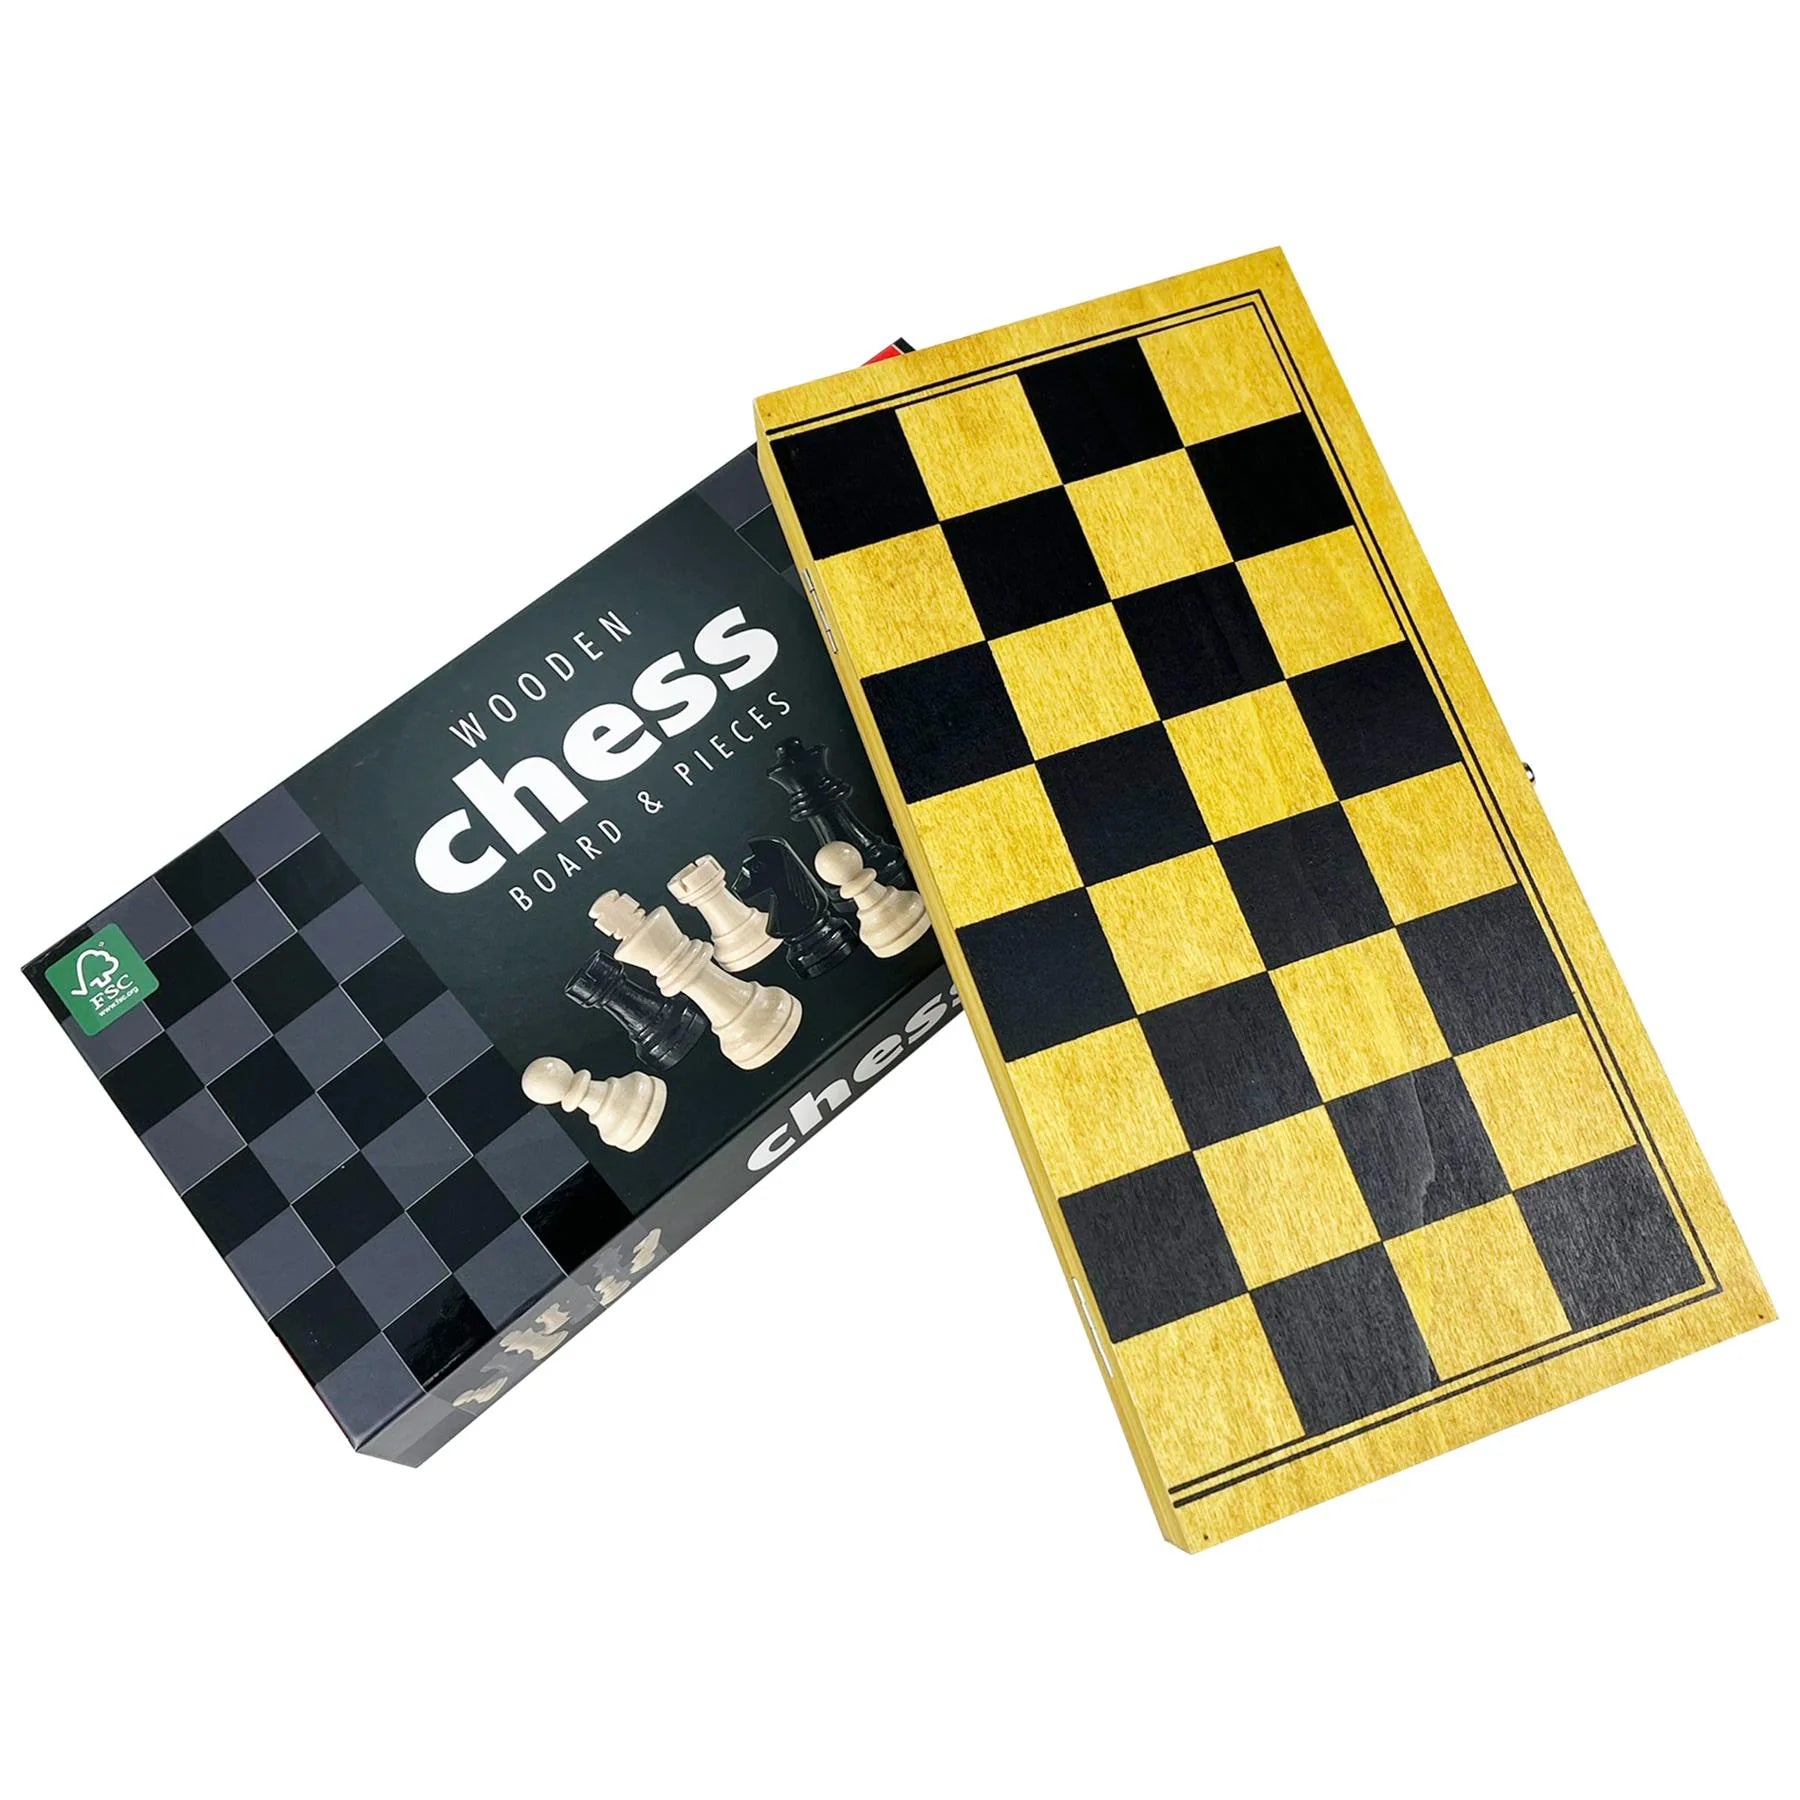 Kids Games | Wooden Chess Board and Set by Weirs of Baggot Street